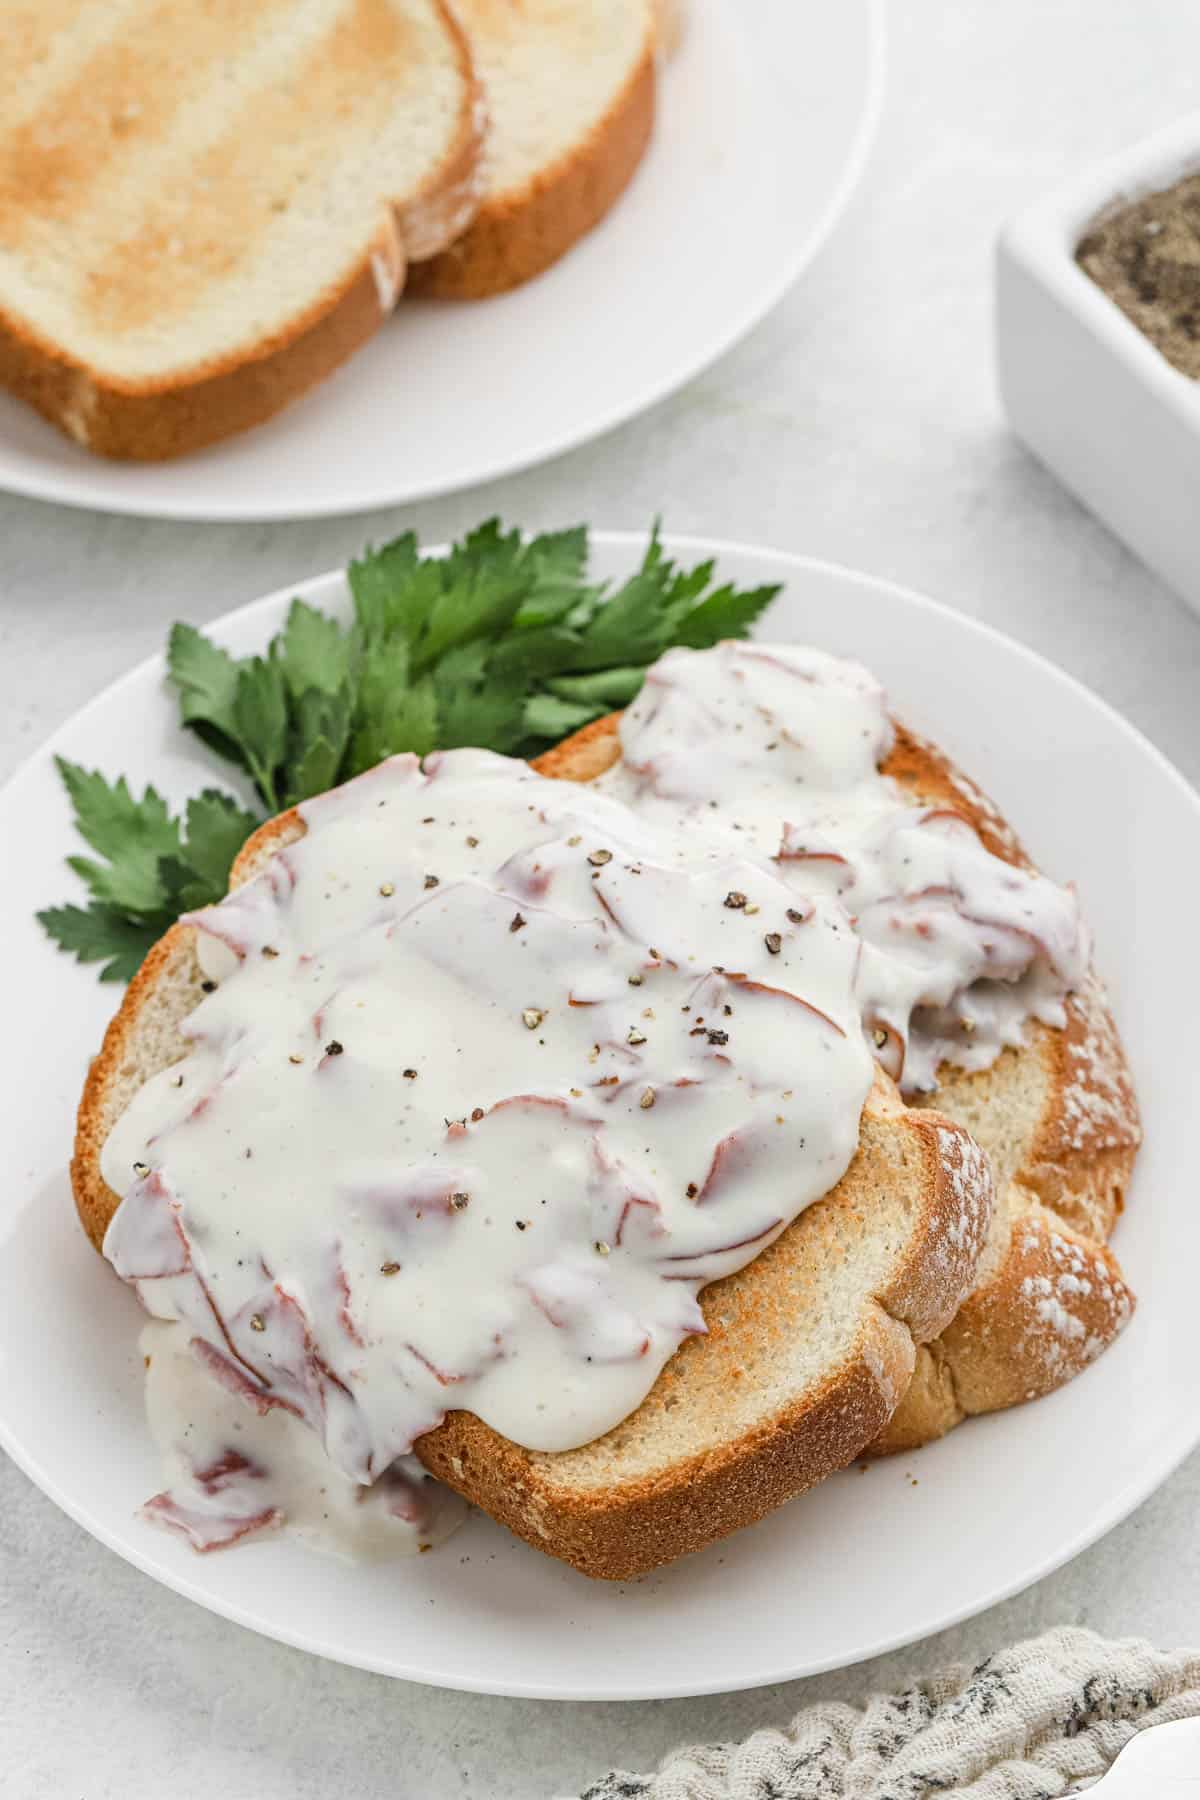 chipped beef gravy on toast garnished with herbs on a white plate